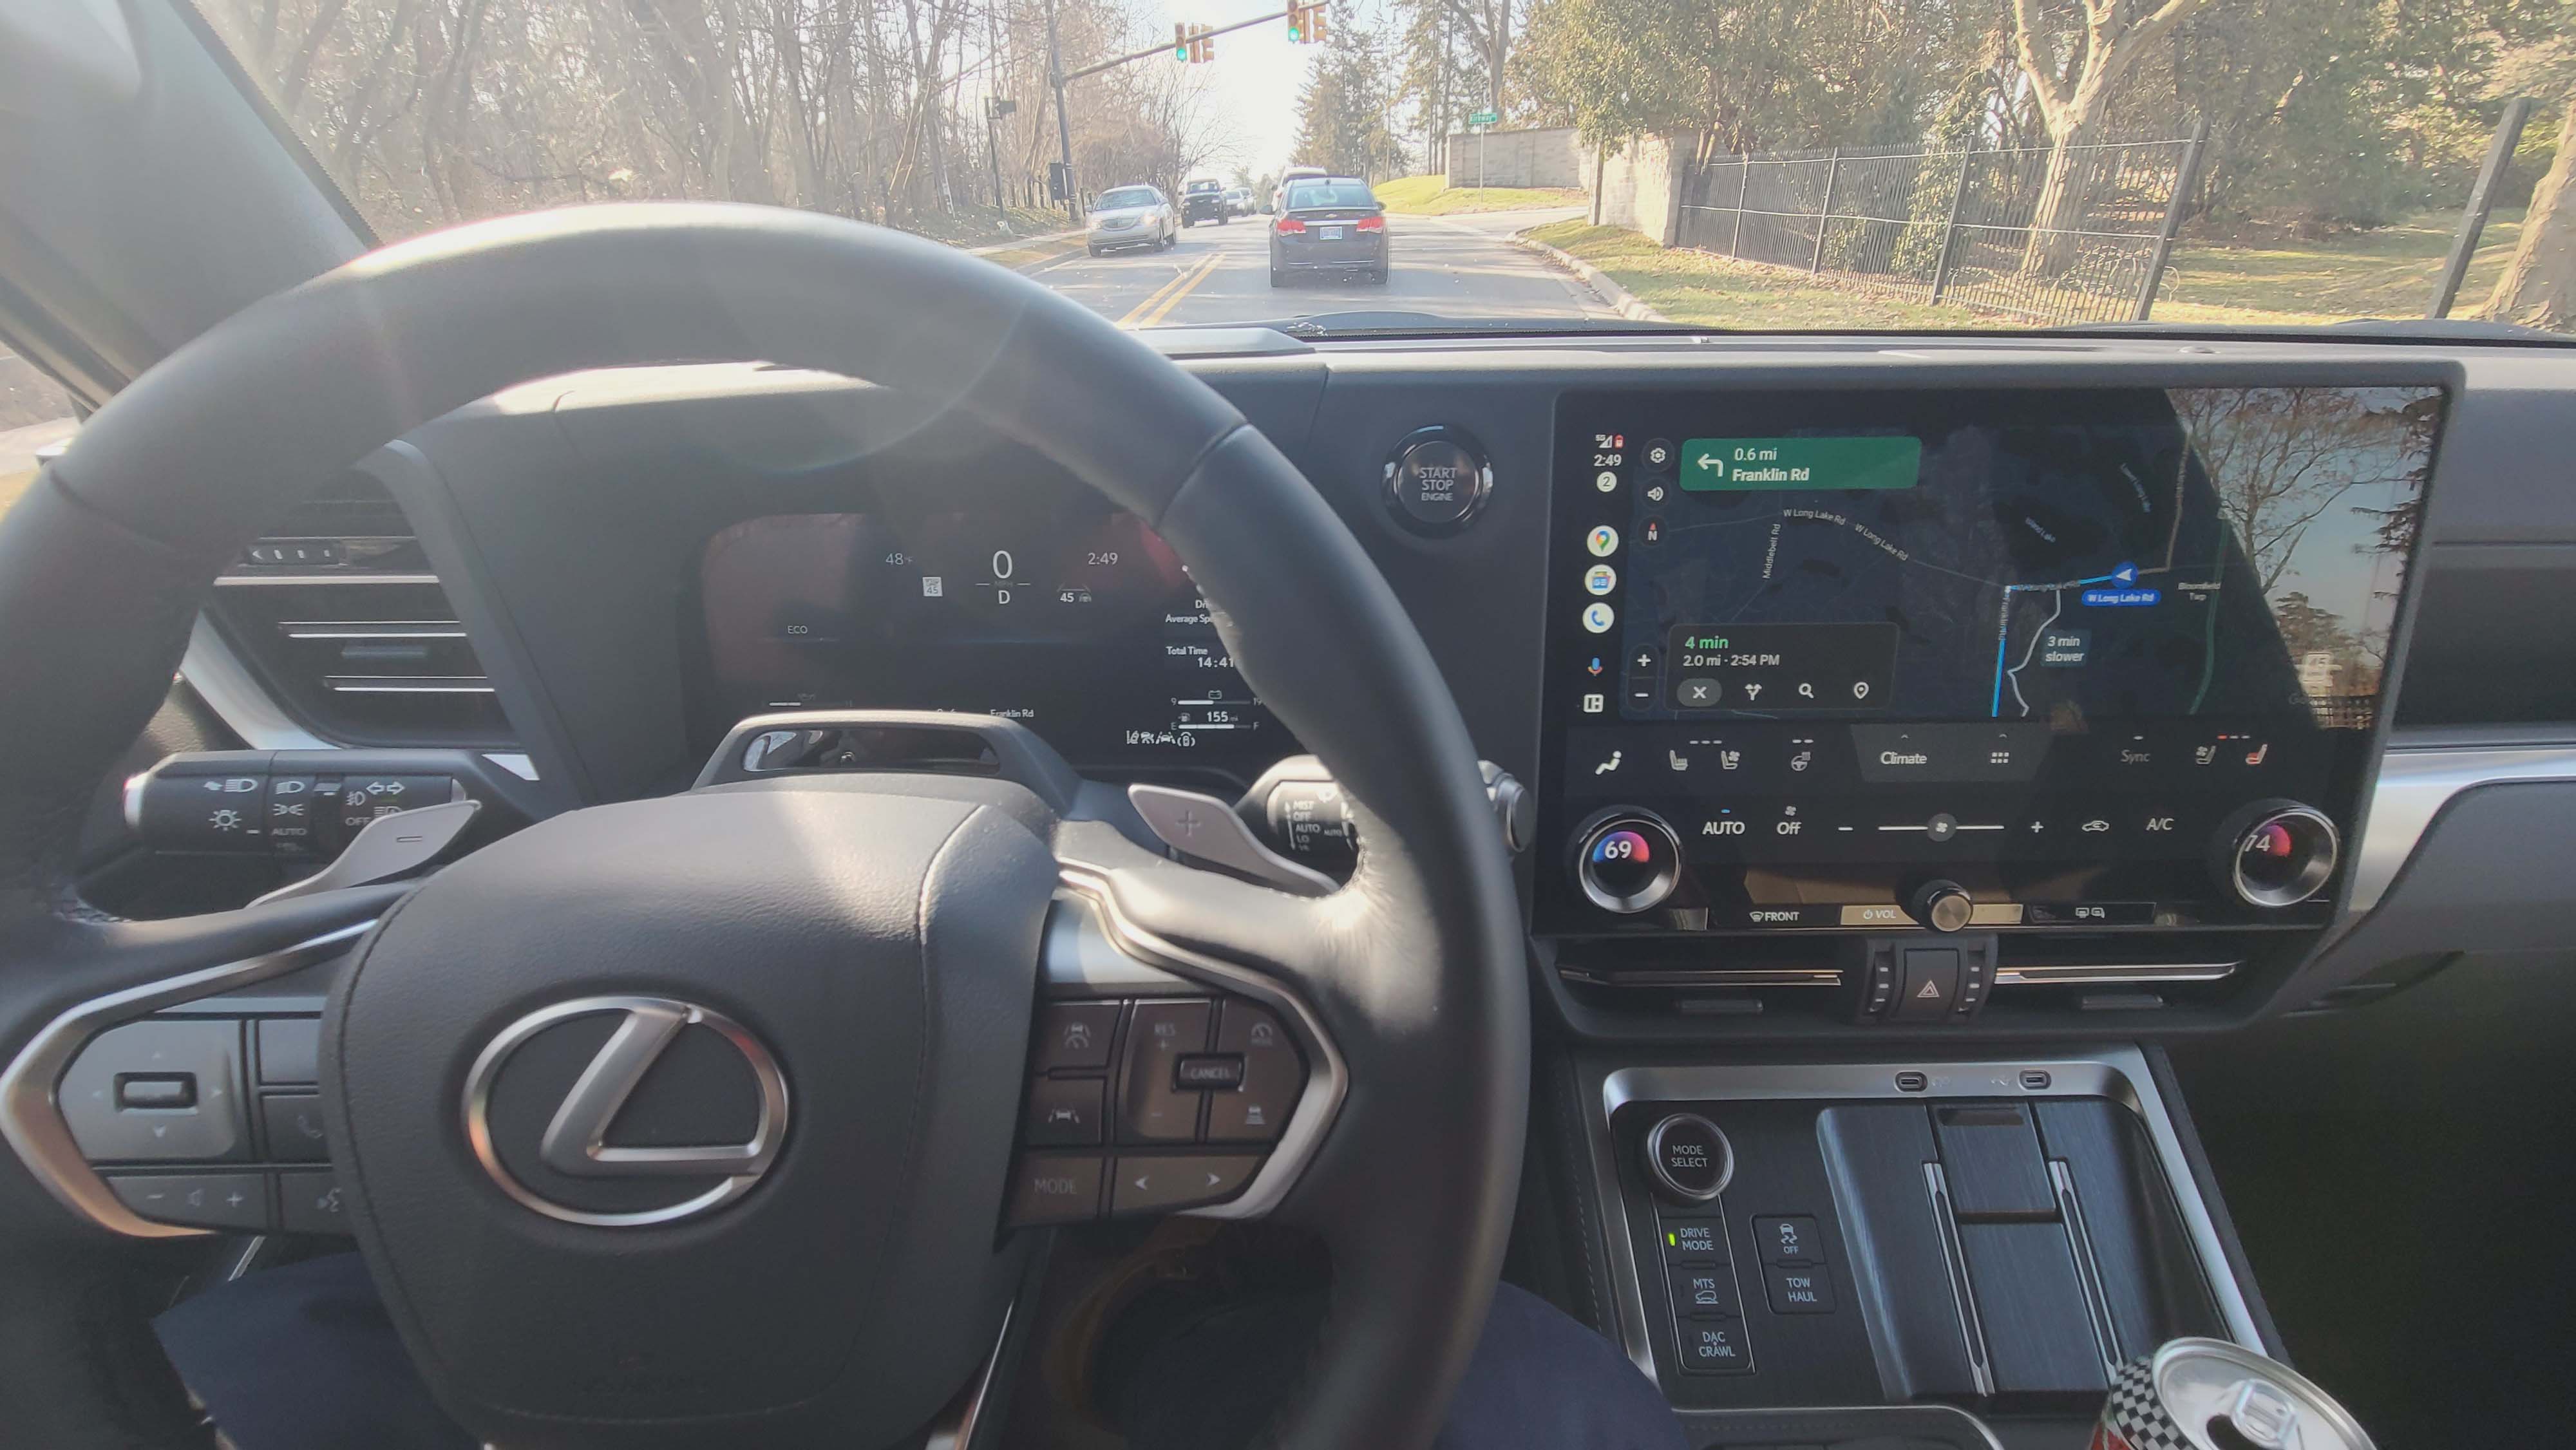 The infotainment system in the 2024 Lexus GX 550 4WD is a big improvement over previous generation Lexi.